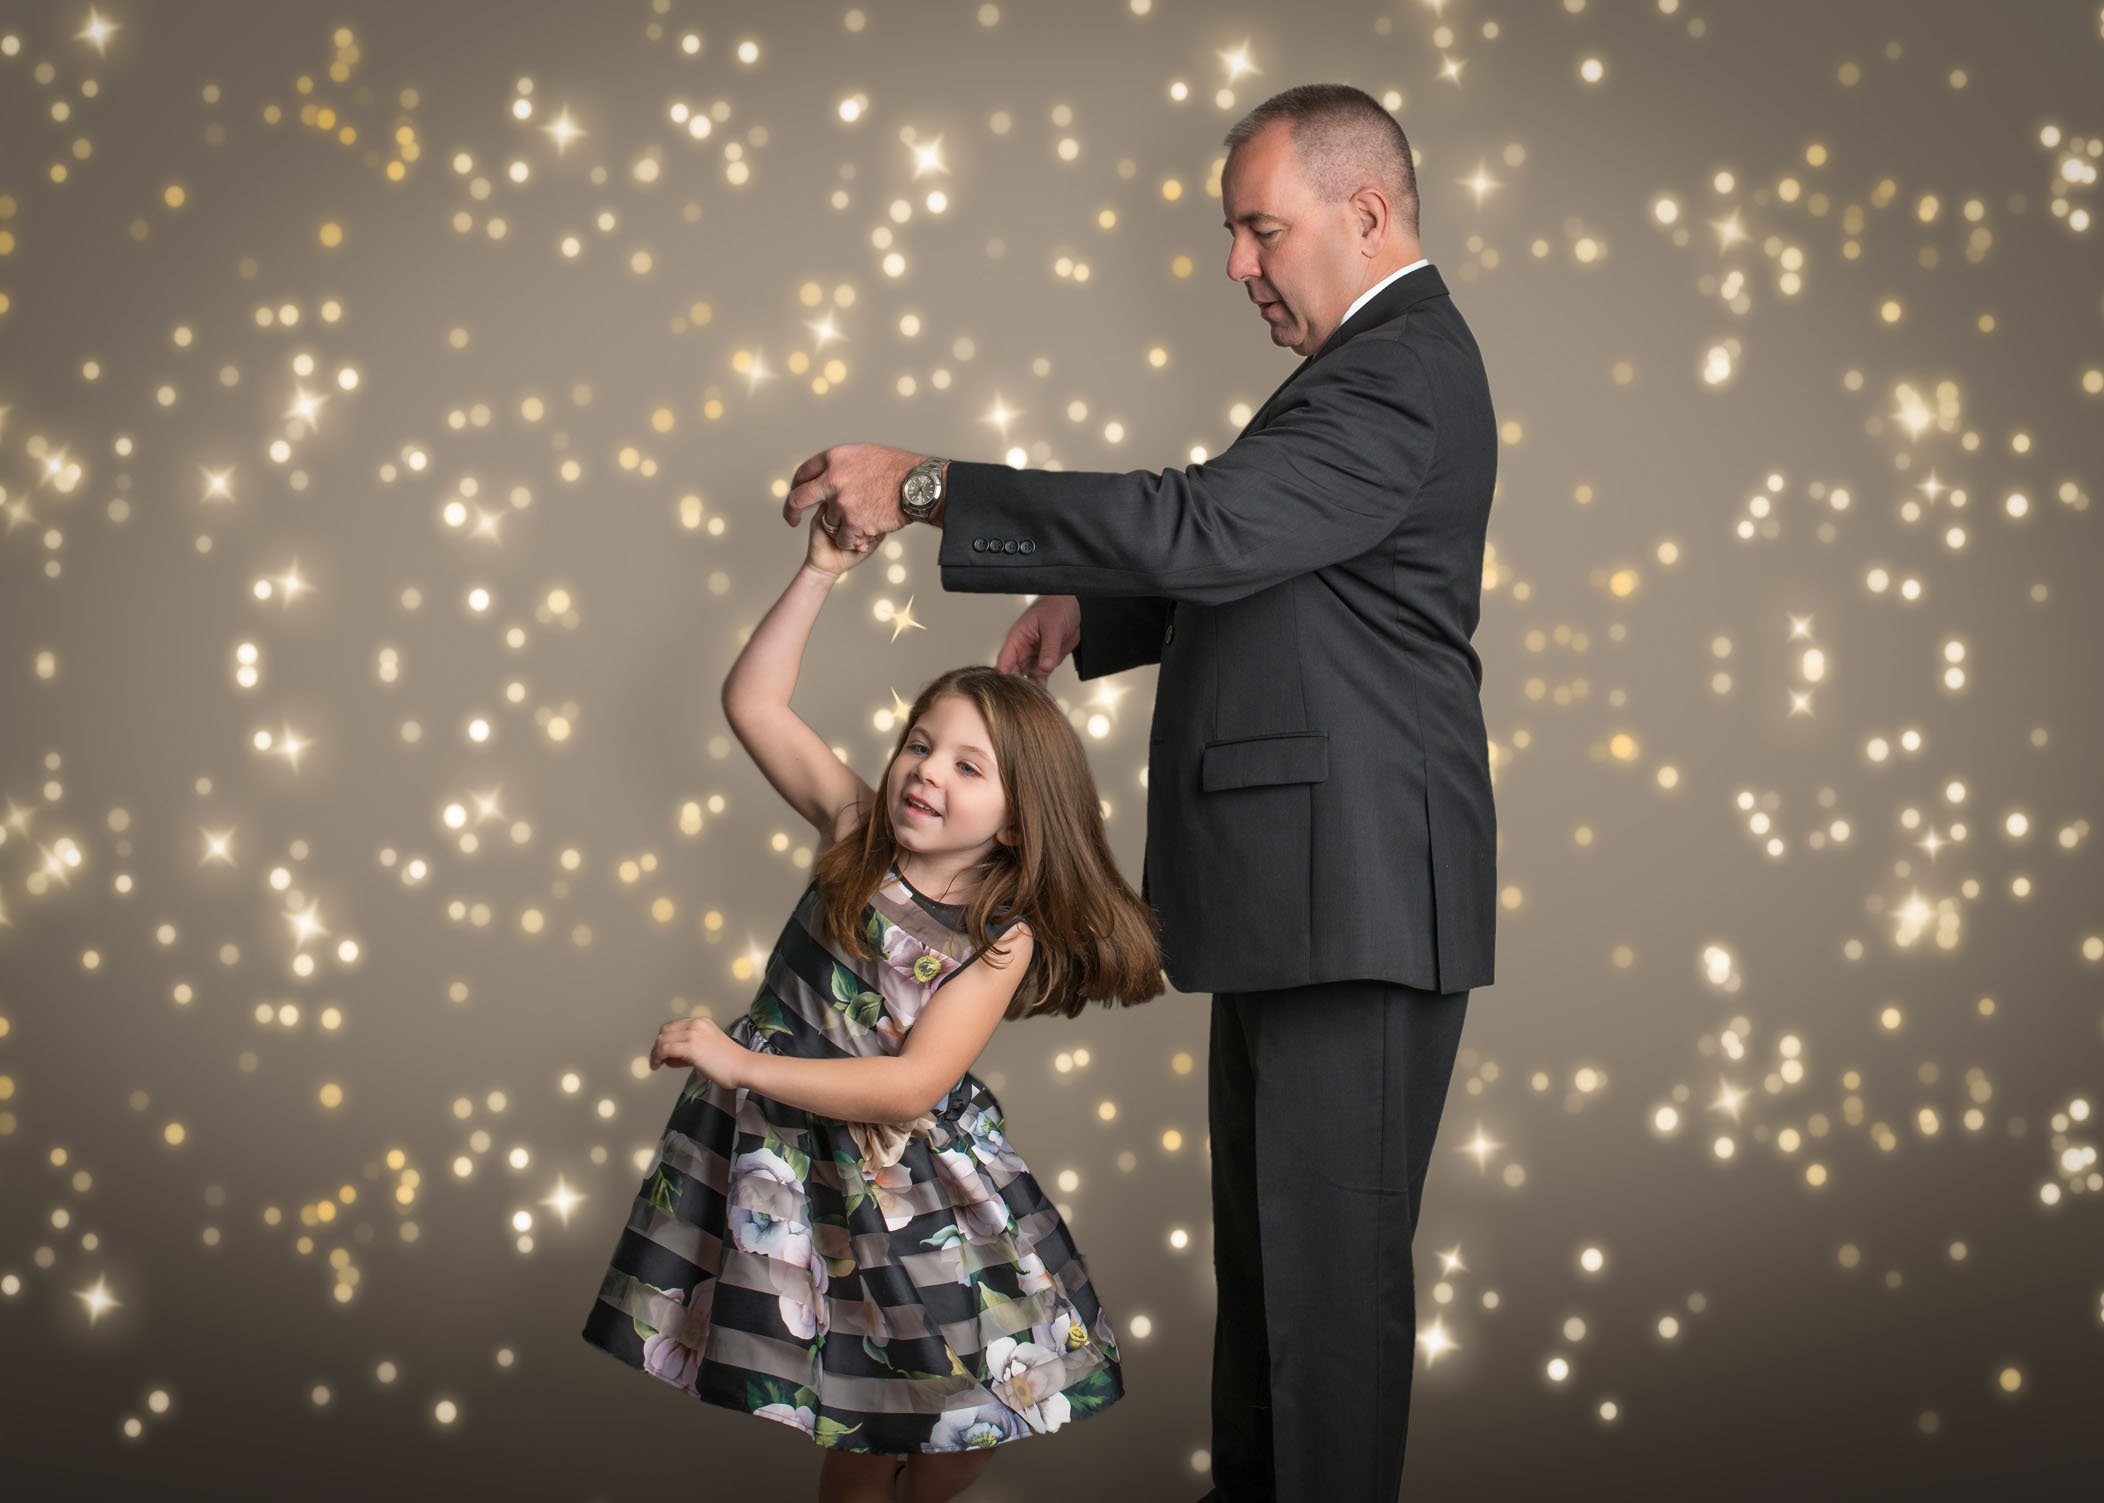 Dad twirling 5 year old daughter with bokeh lights behind them